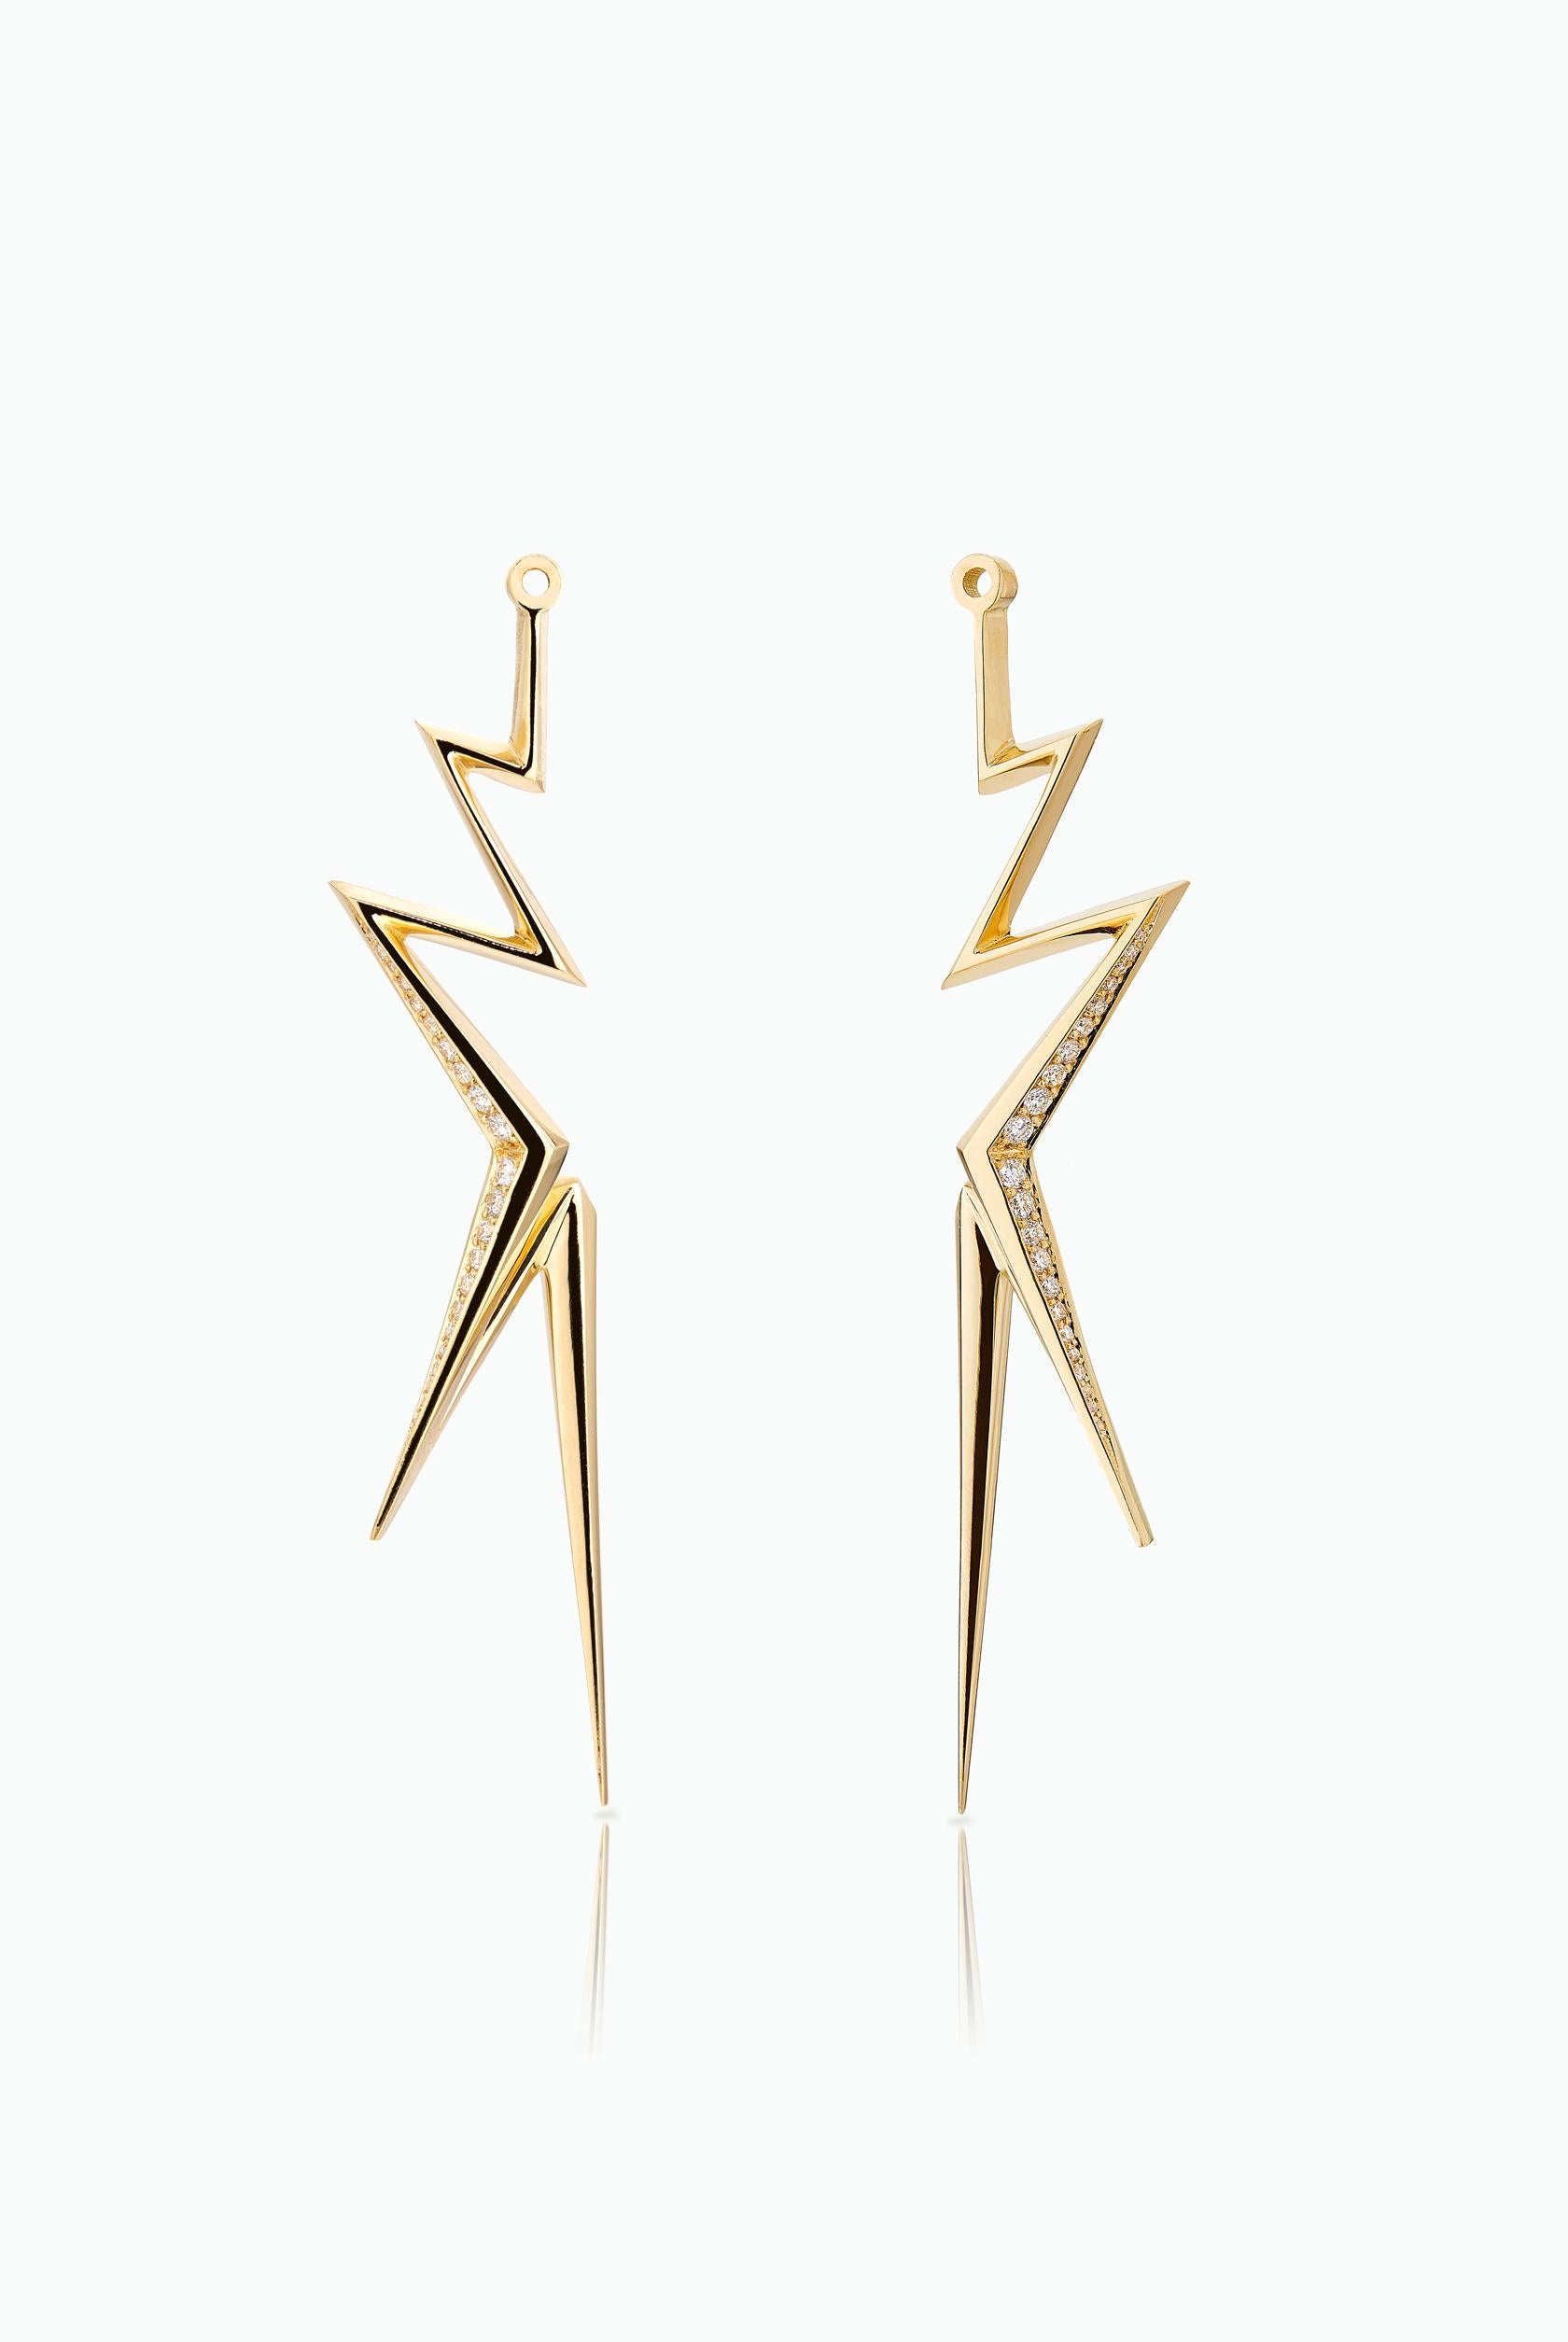 A Modern, Edgy Ear Jacket and Stud Earring for those of you who who are drawn to statement pieces with an element of surprise. Handcrafted in 18 Carat Yellow Gold with Pave Set Brilliant Cut Diamonds. A play of light and line that comes to life when